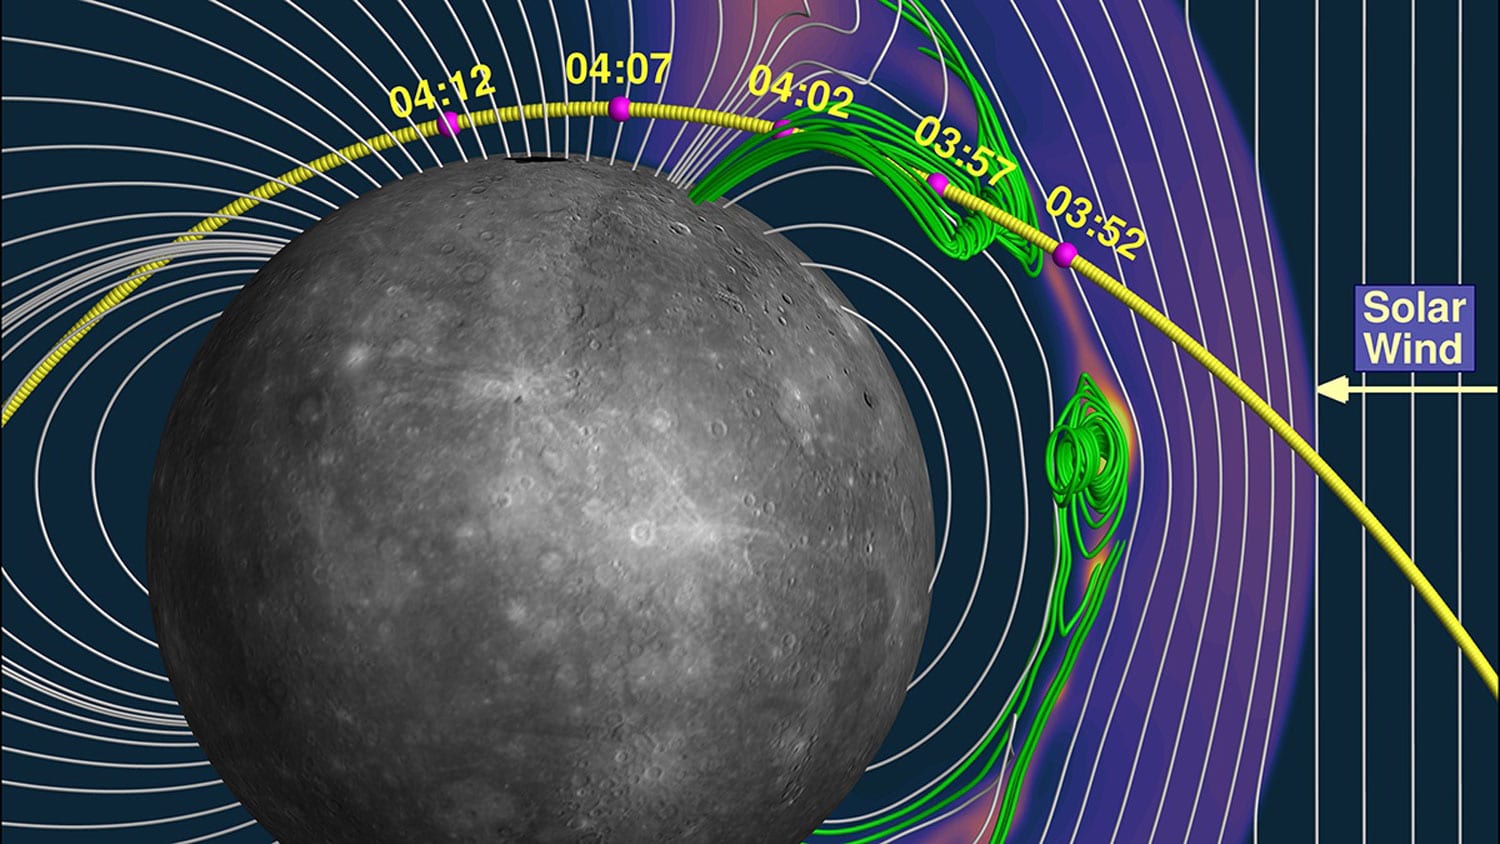 Solar wind is a significant driver of atmospheric sodium at Mercury - Tech Explorist